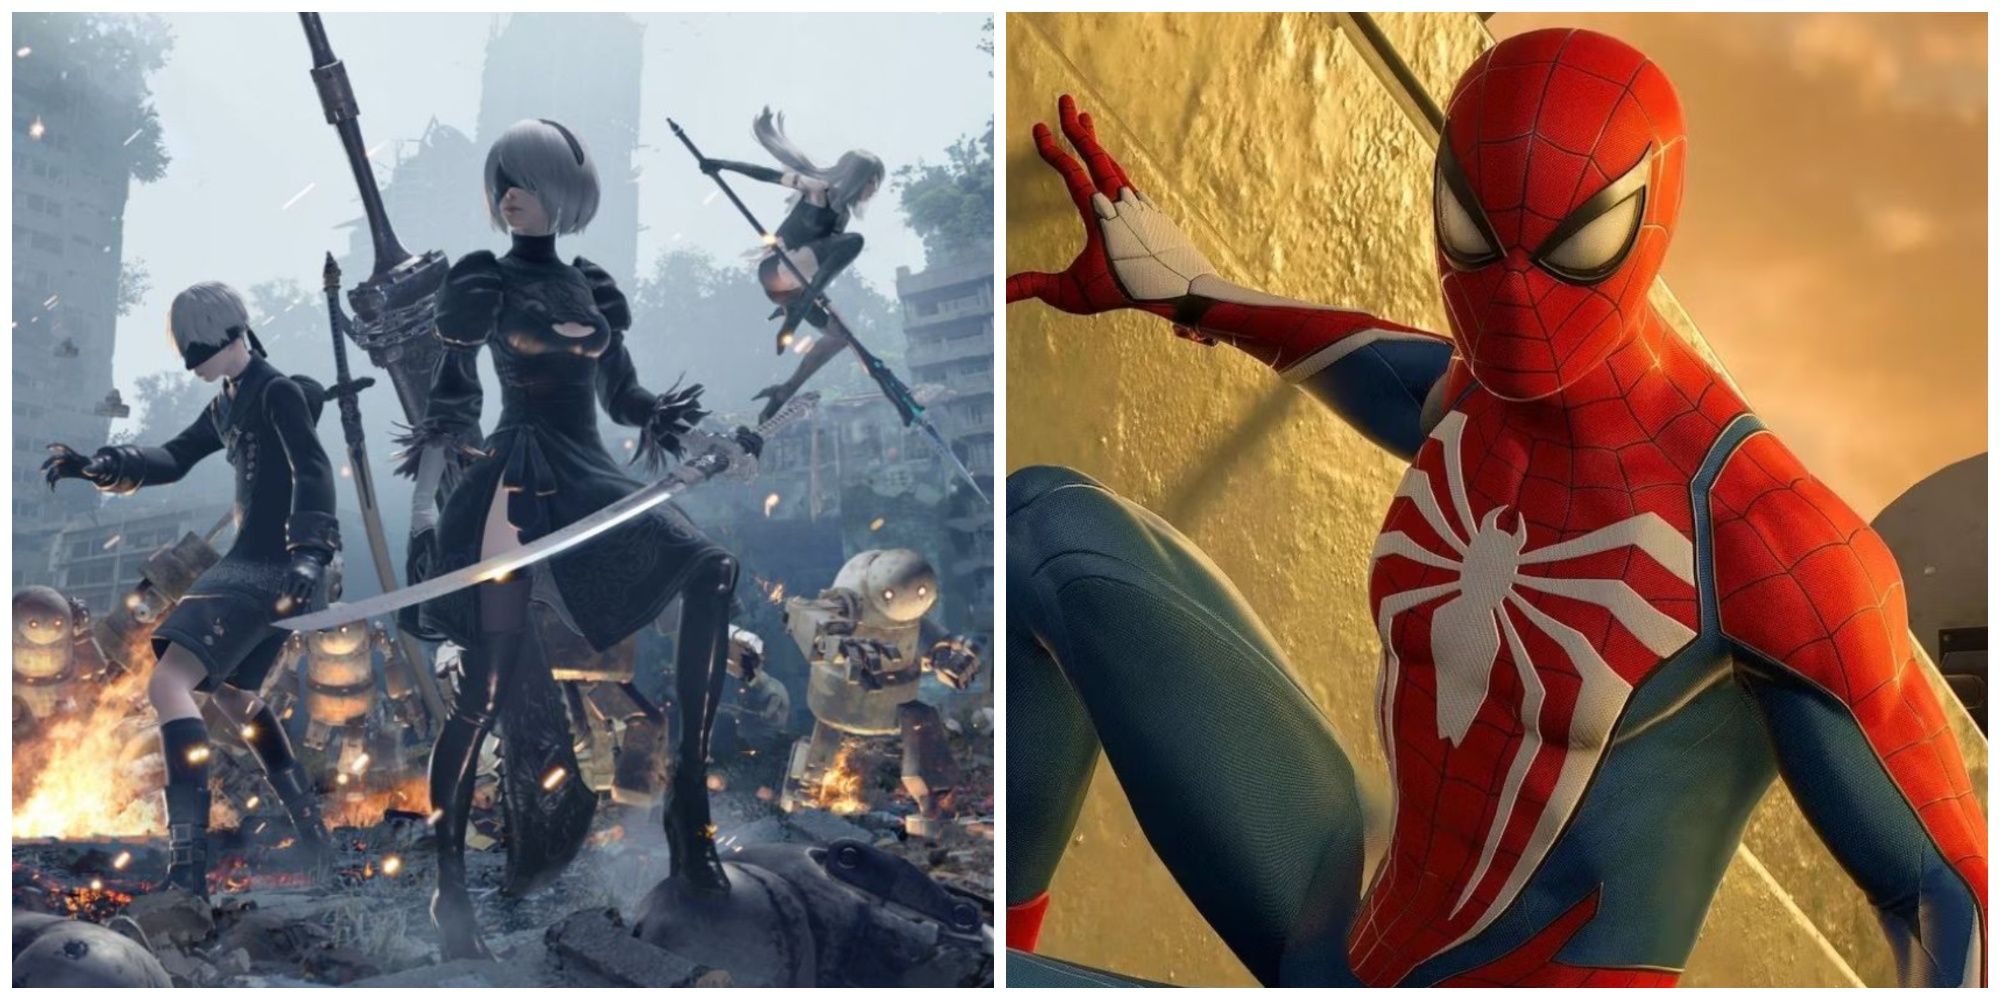 NieR Automata and Marvel's Spider-Man 2